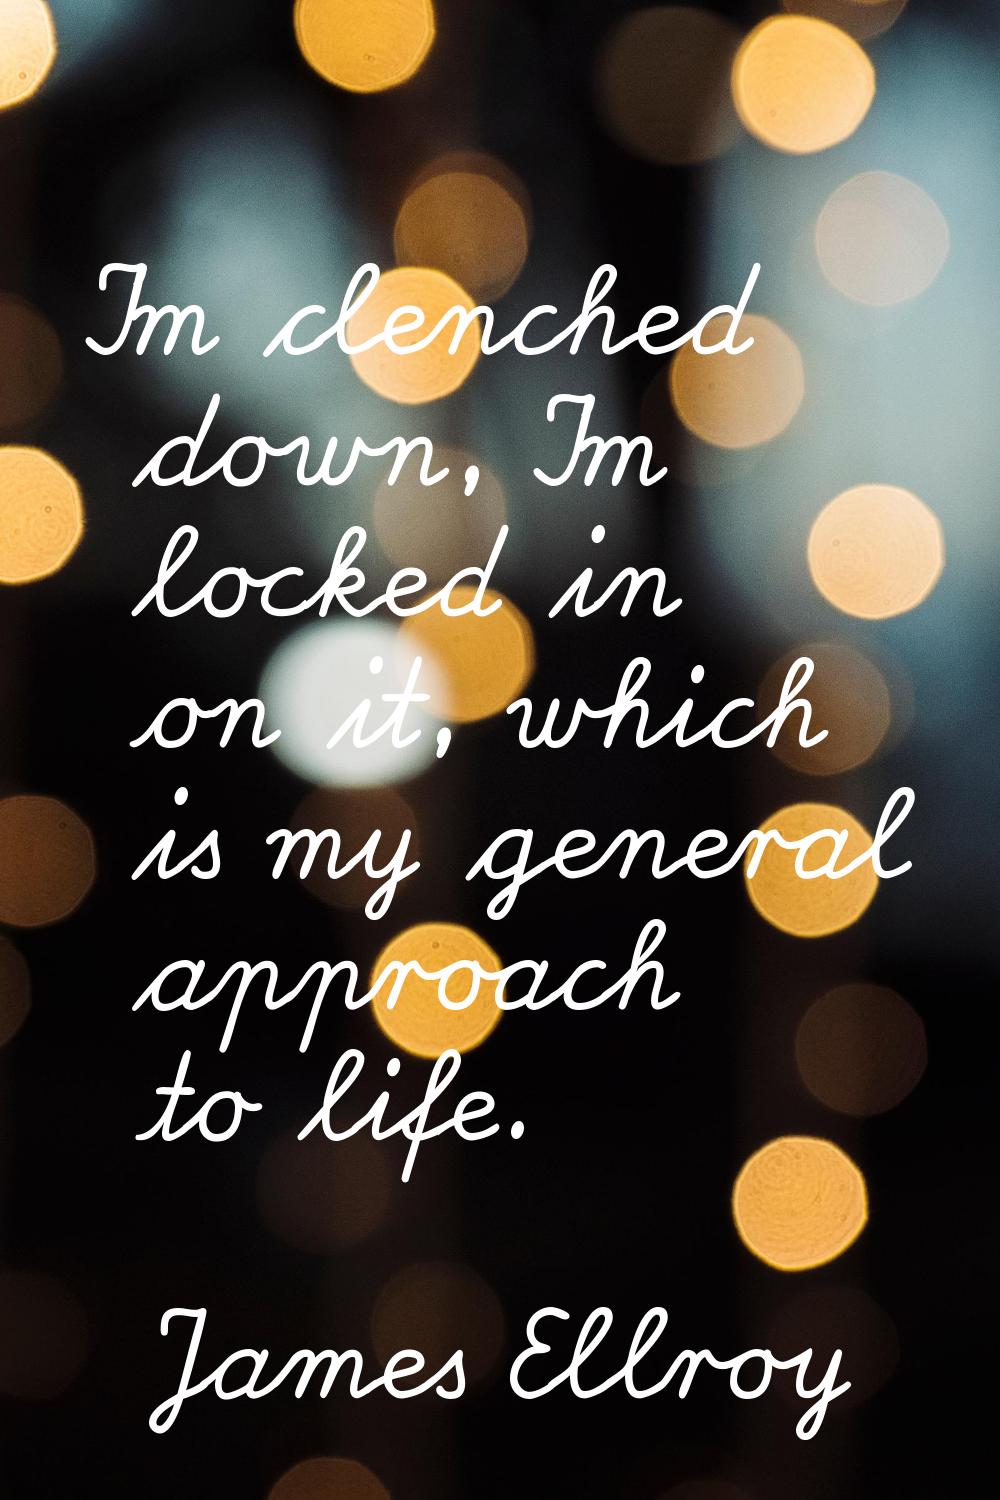 I'm clenched down, I'm locked in on it, which is my general approach to life.